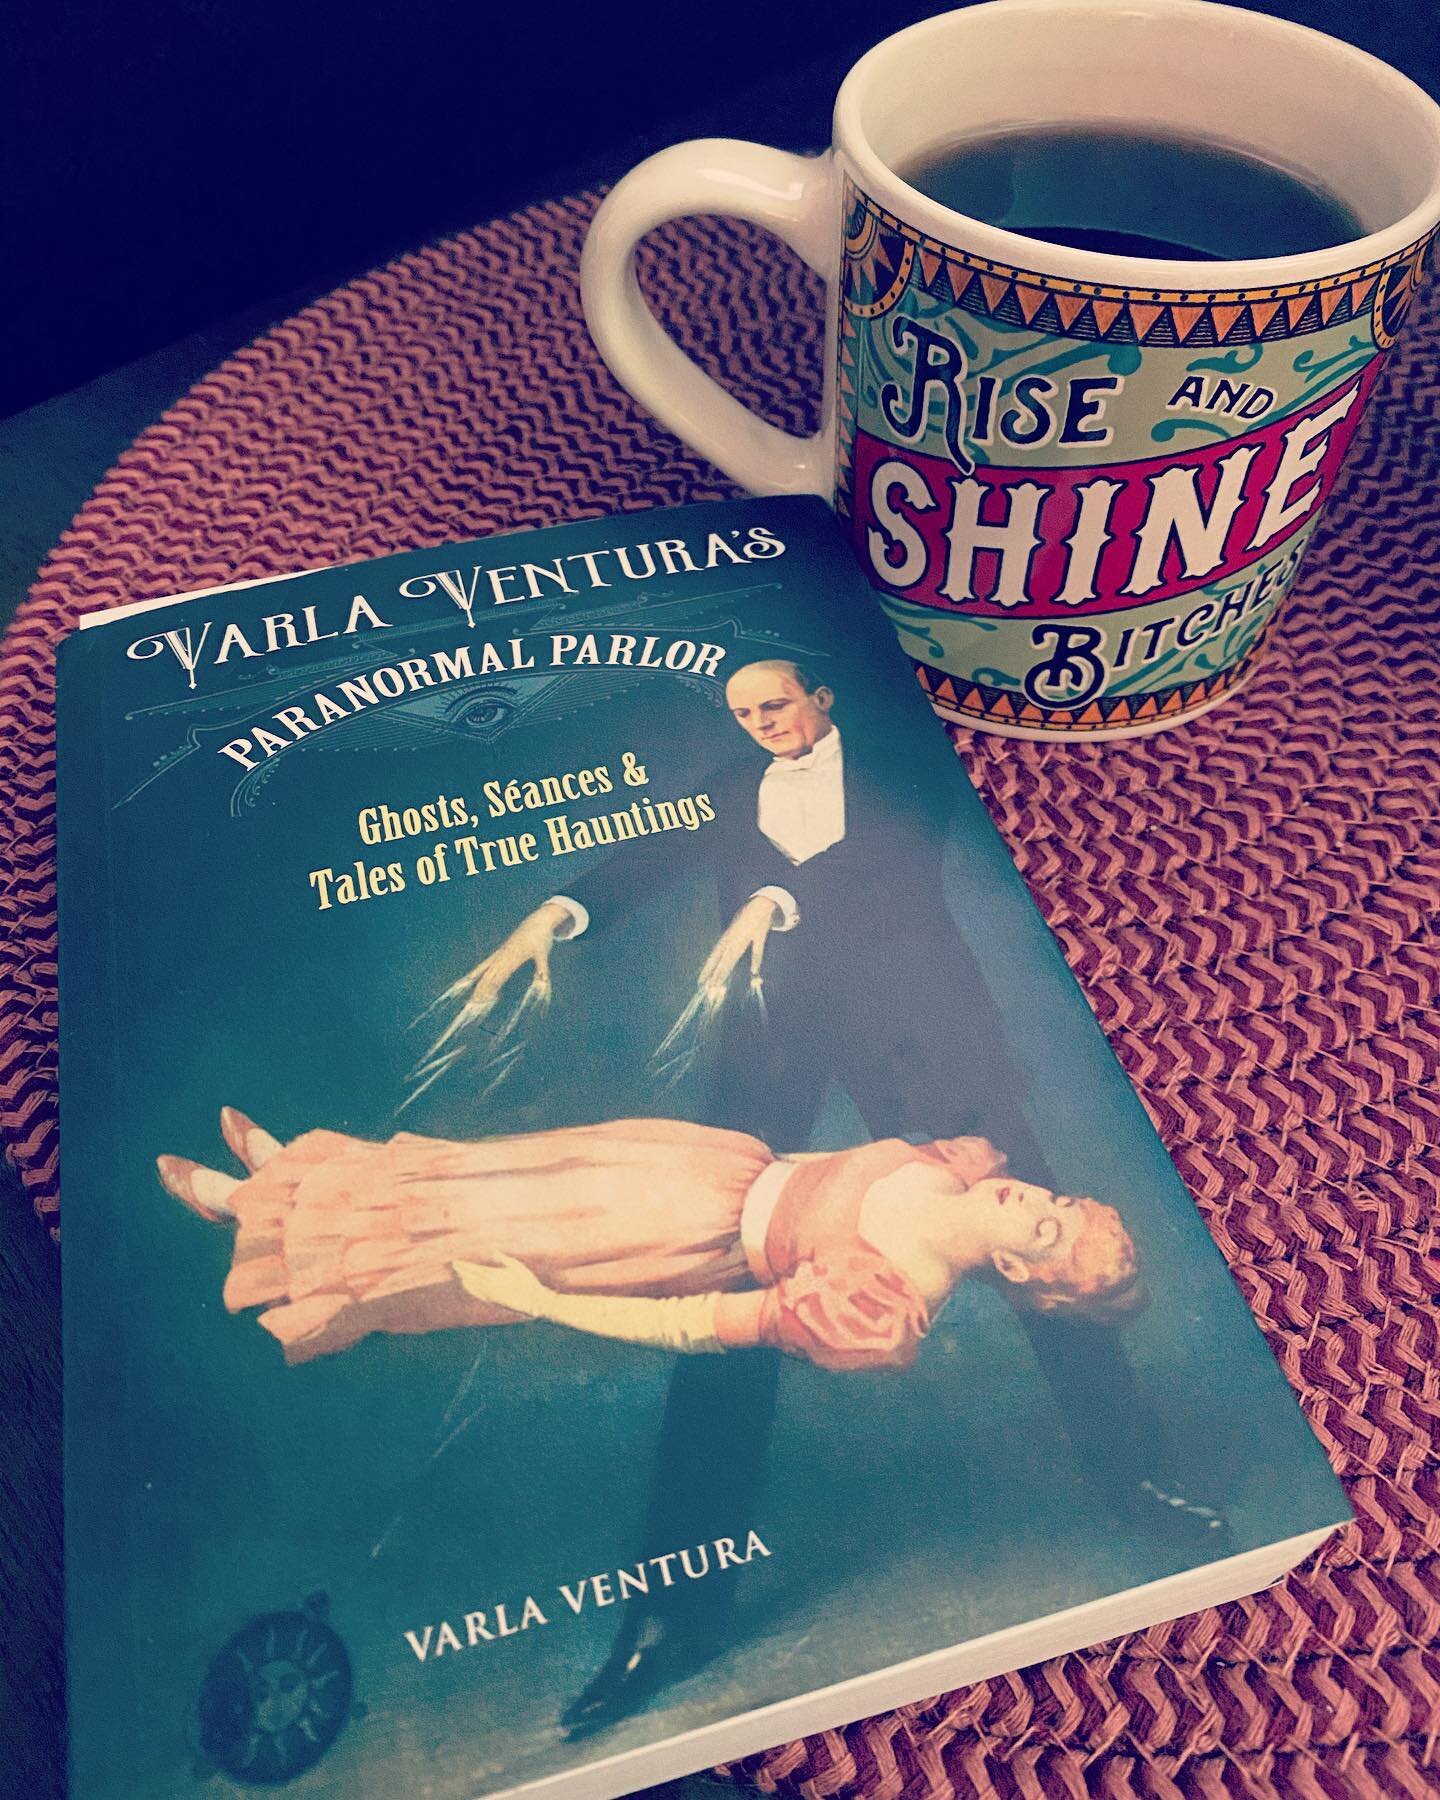 New mug and new (to me) book. Let&rsquo;s get this Monday party started.
.
.
(Mug from @trixieandmilo; book via @wolfgangvintagebooks)
.
.
.
.
#booksabound #mugshotmonday #mondaymotivation #mondaymood #bookaholic #booklover #bookstagram #booknerd #bo